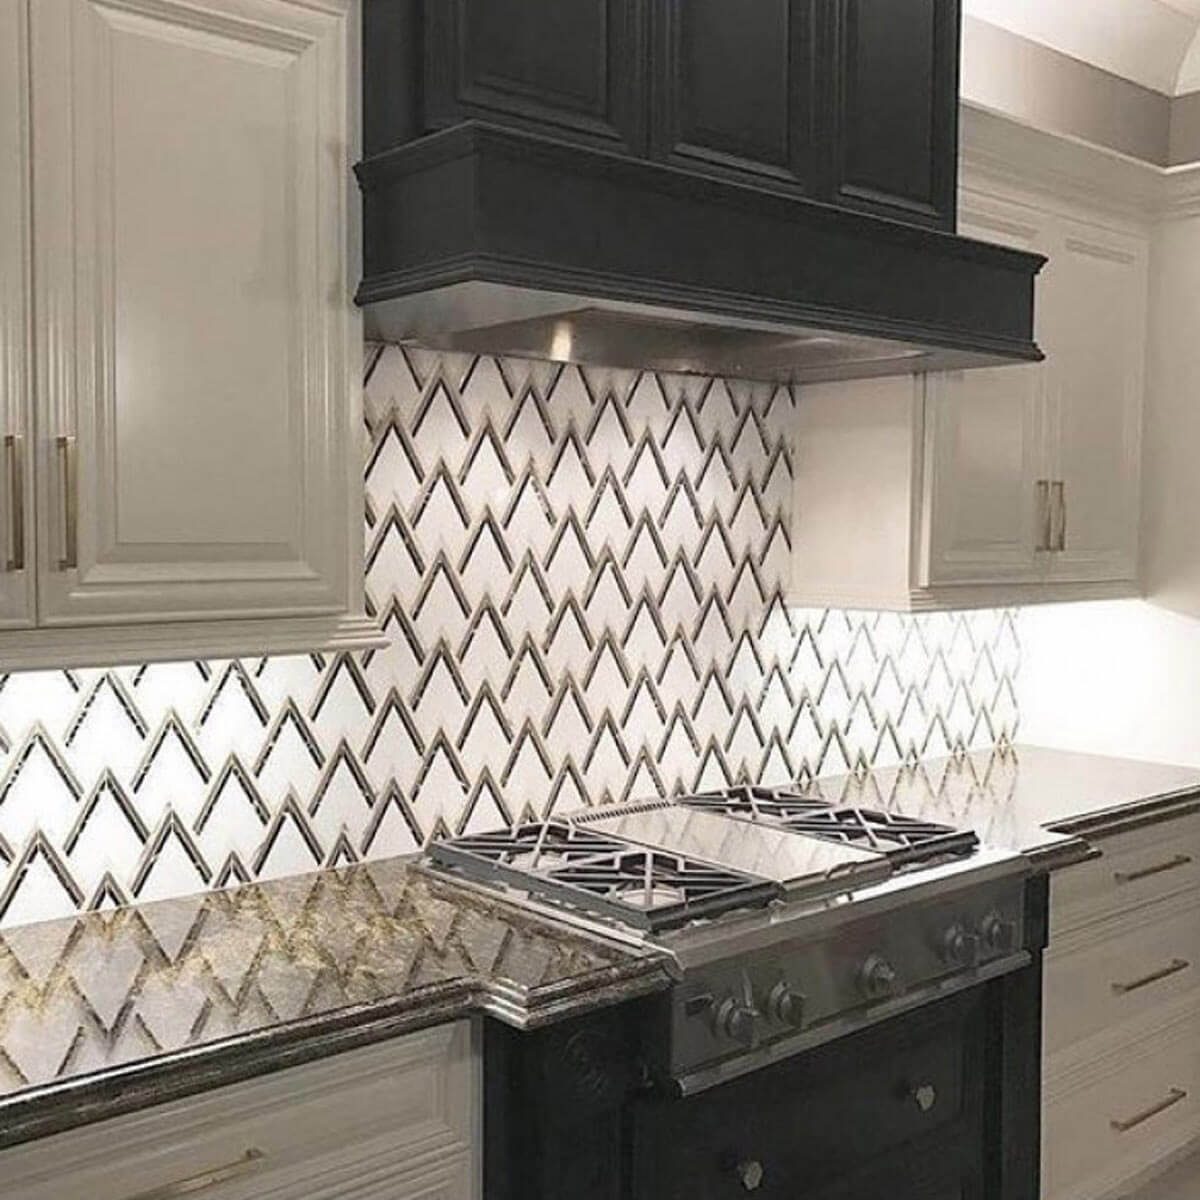 The 30 Backsplash Ideas Your Kitchen Can’t Live Without